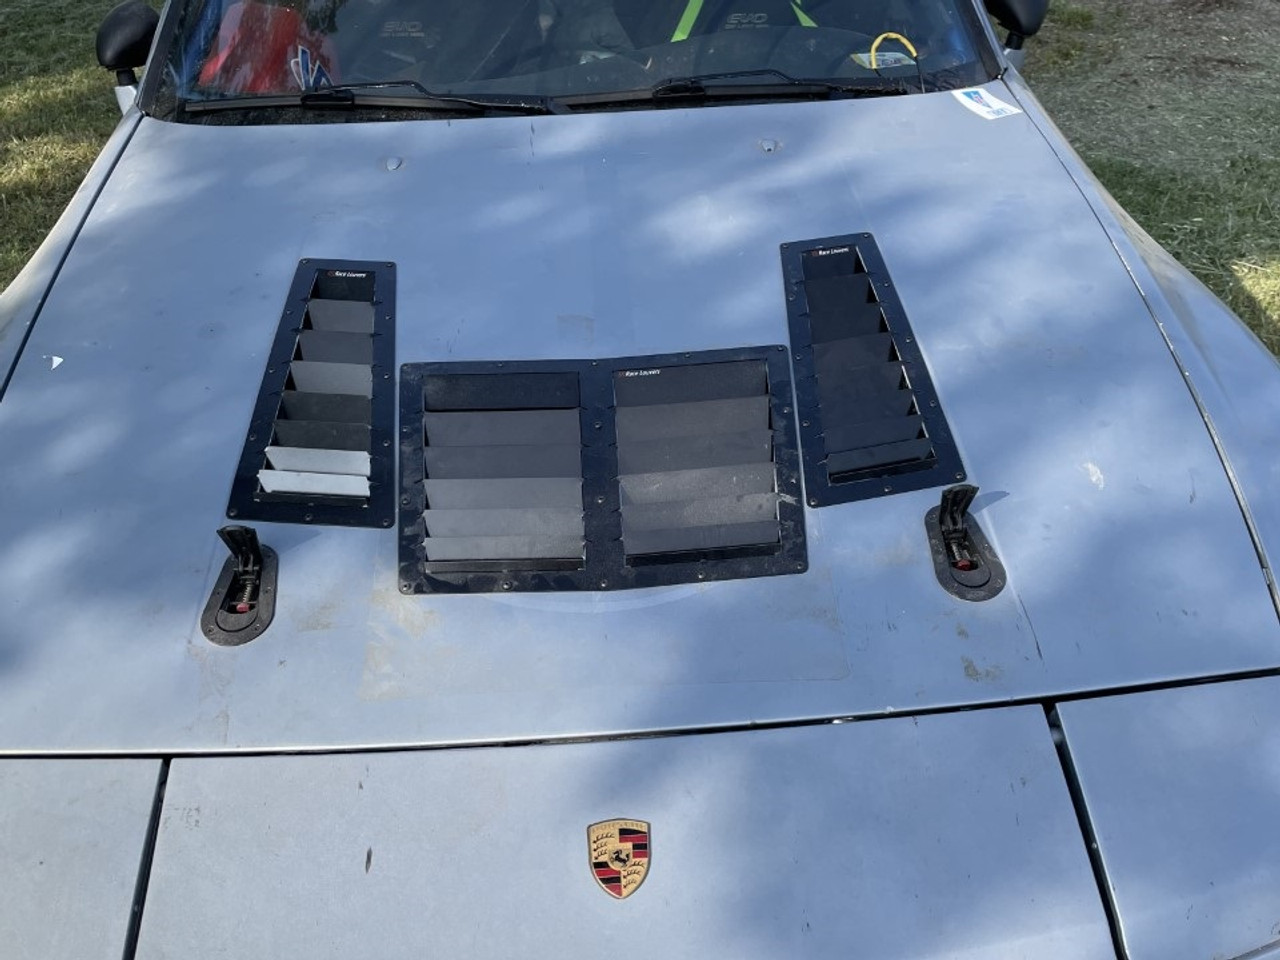 Race Louvers Porsche 924/944 RX extreme trim center racing heat extractor is designed for high performance driving, auto cross and track duty.